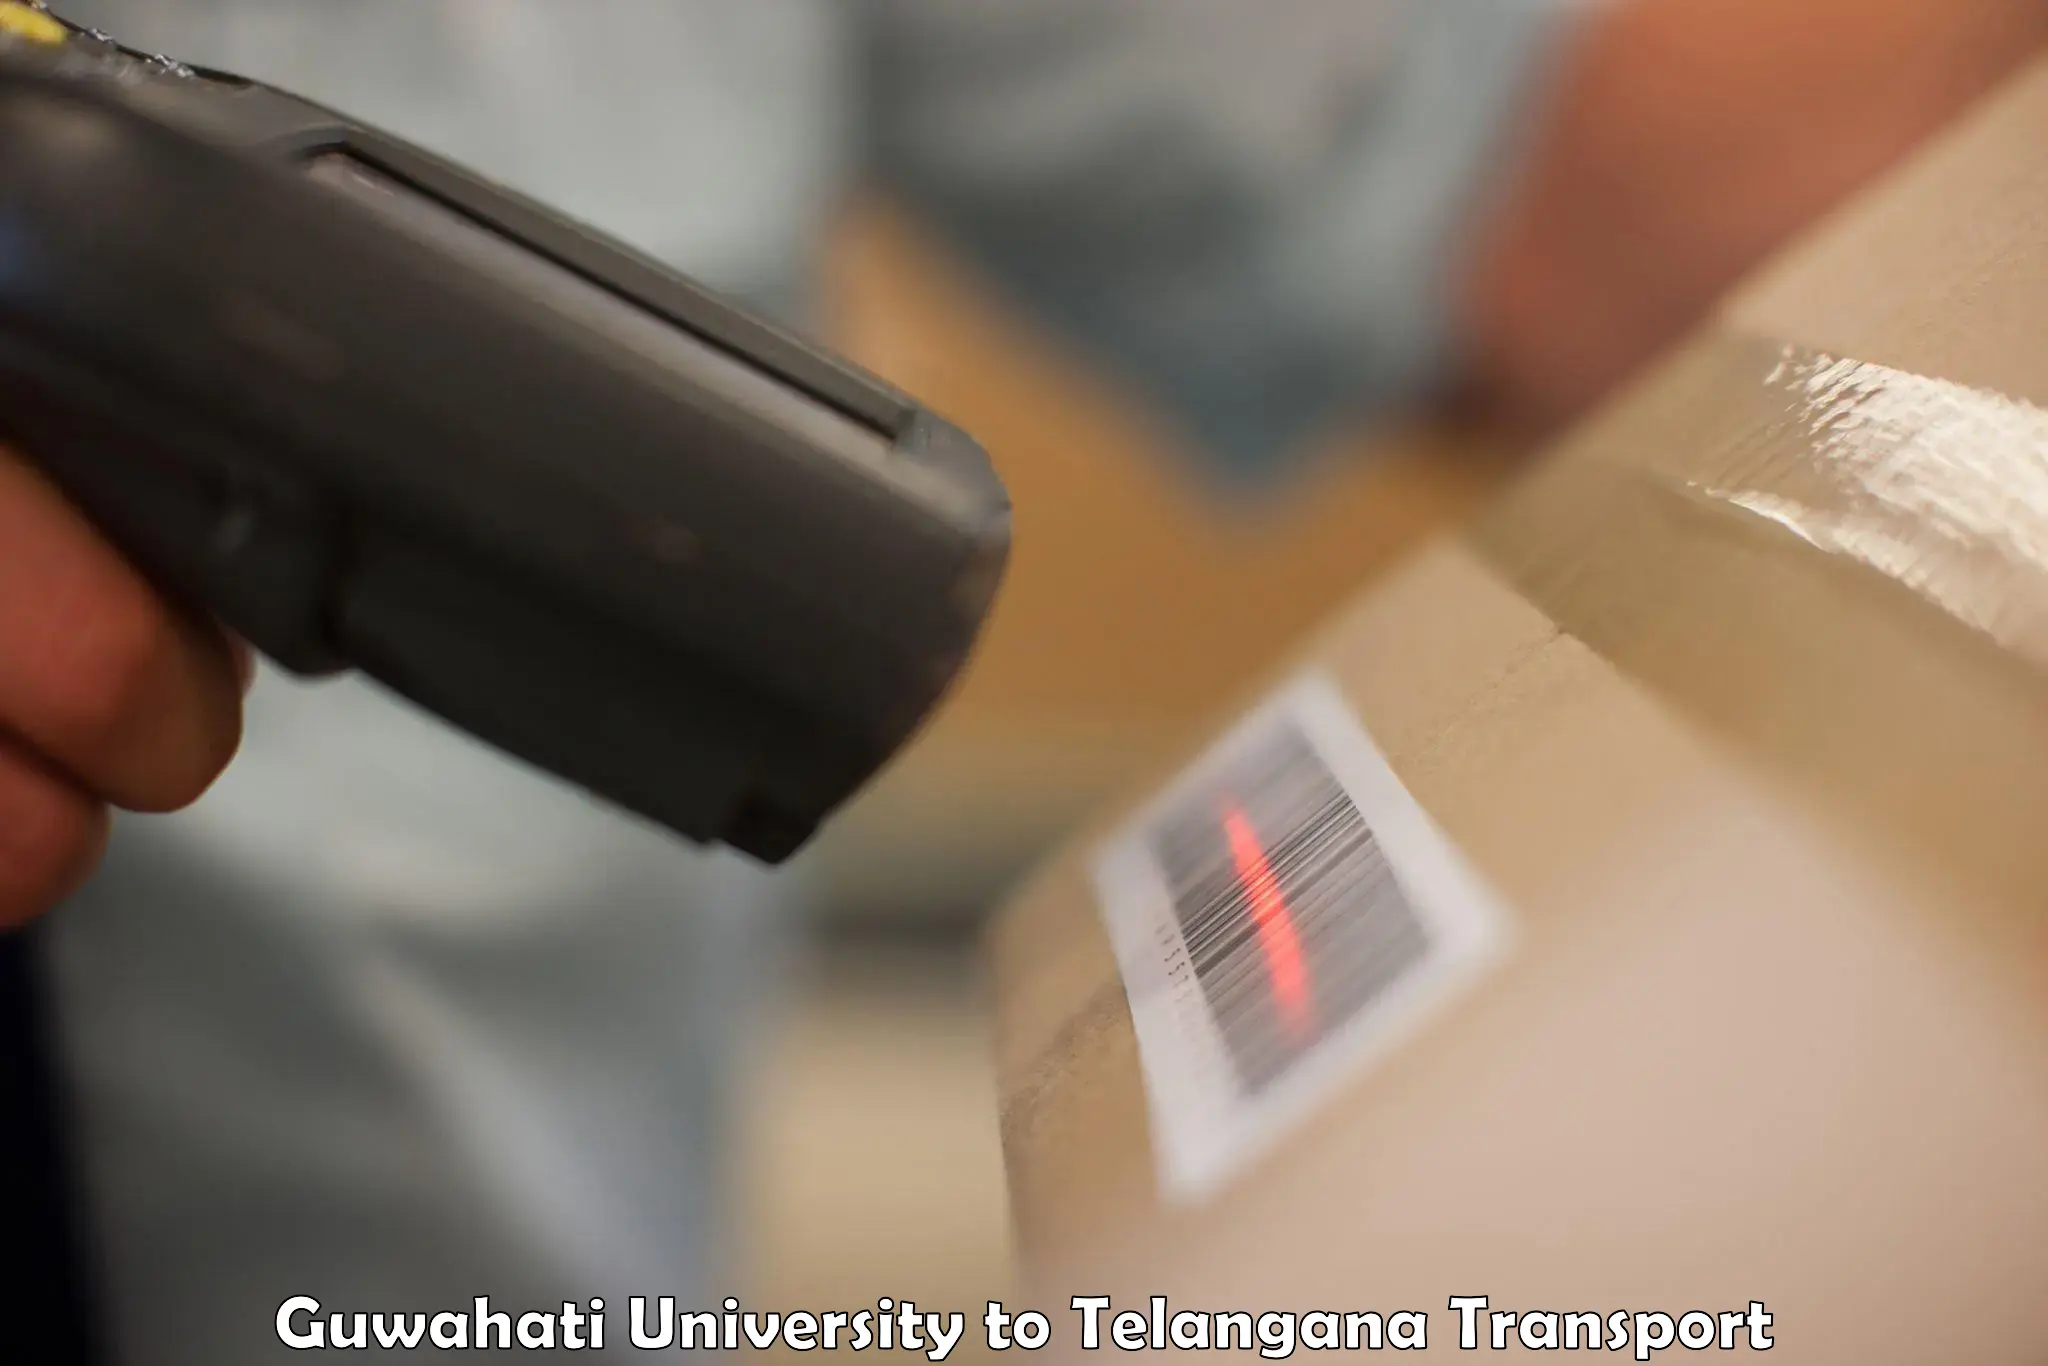 Package delivery services Guwahati University to Telangana